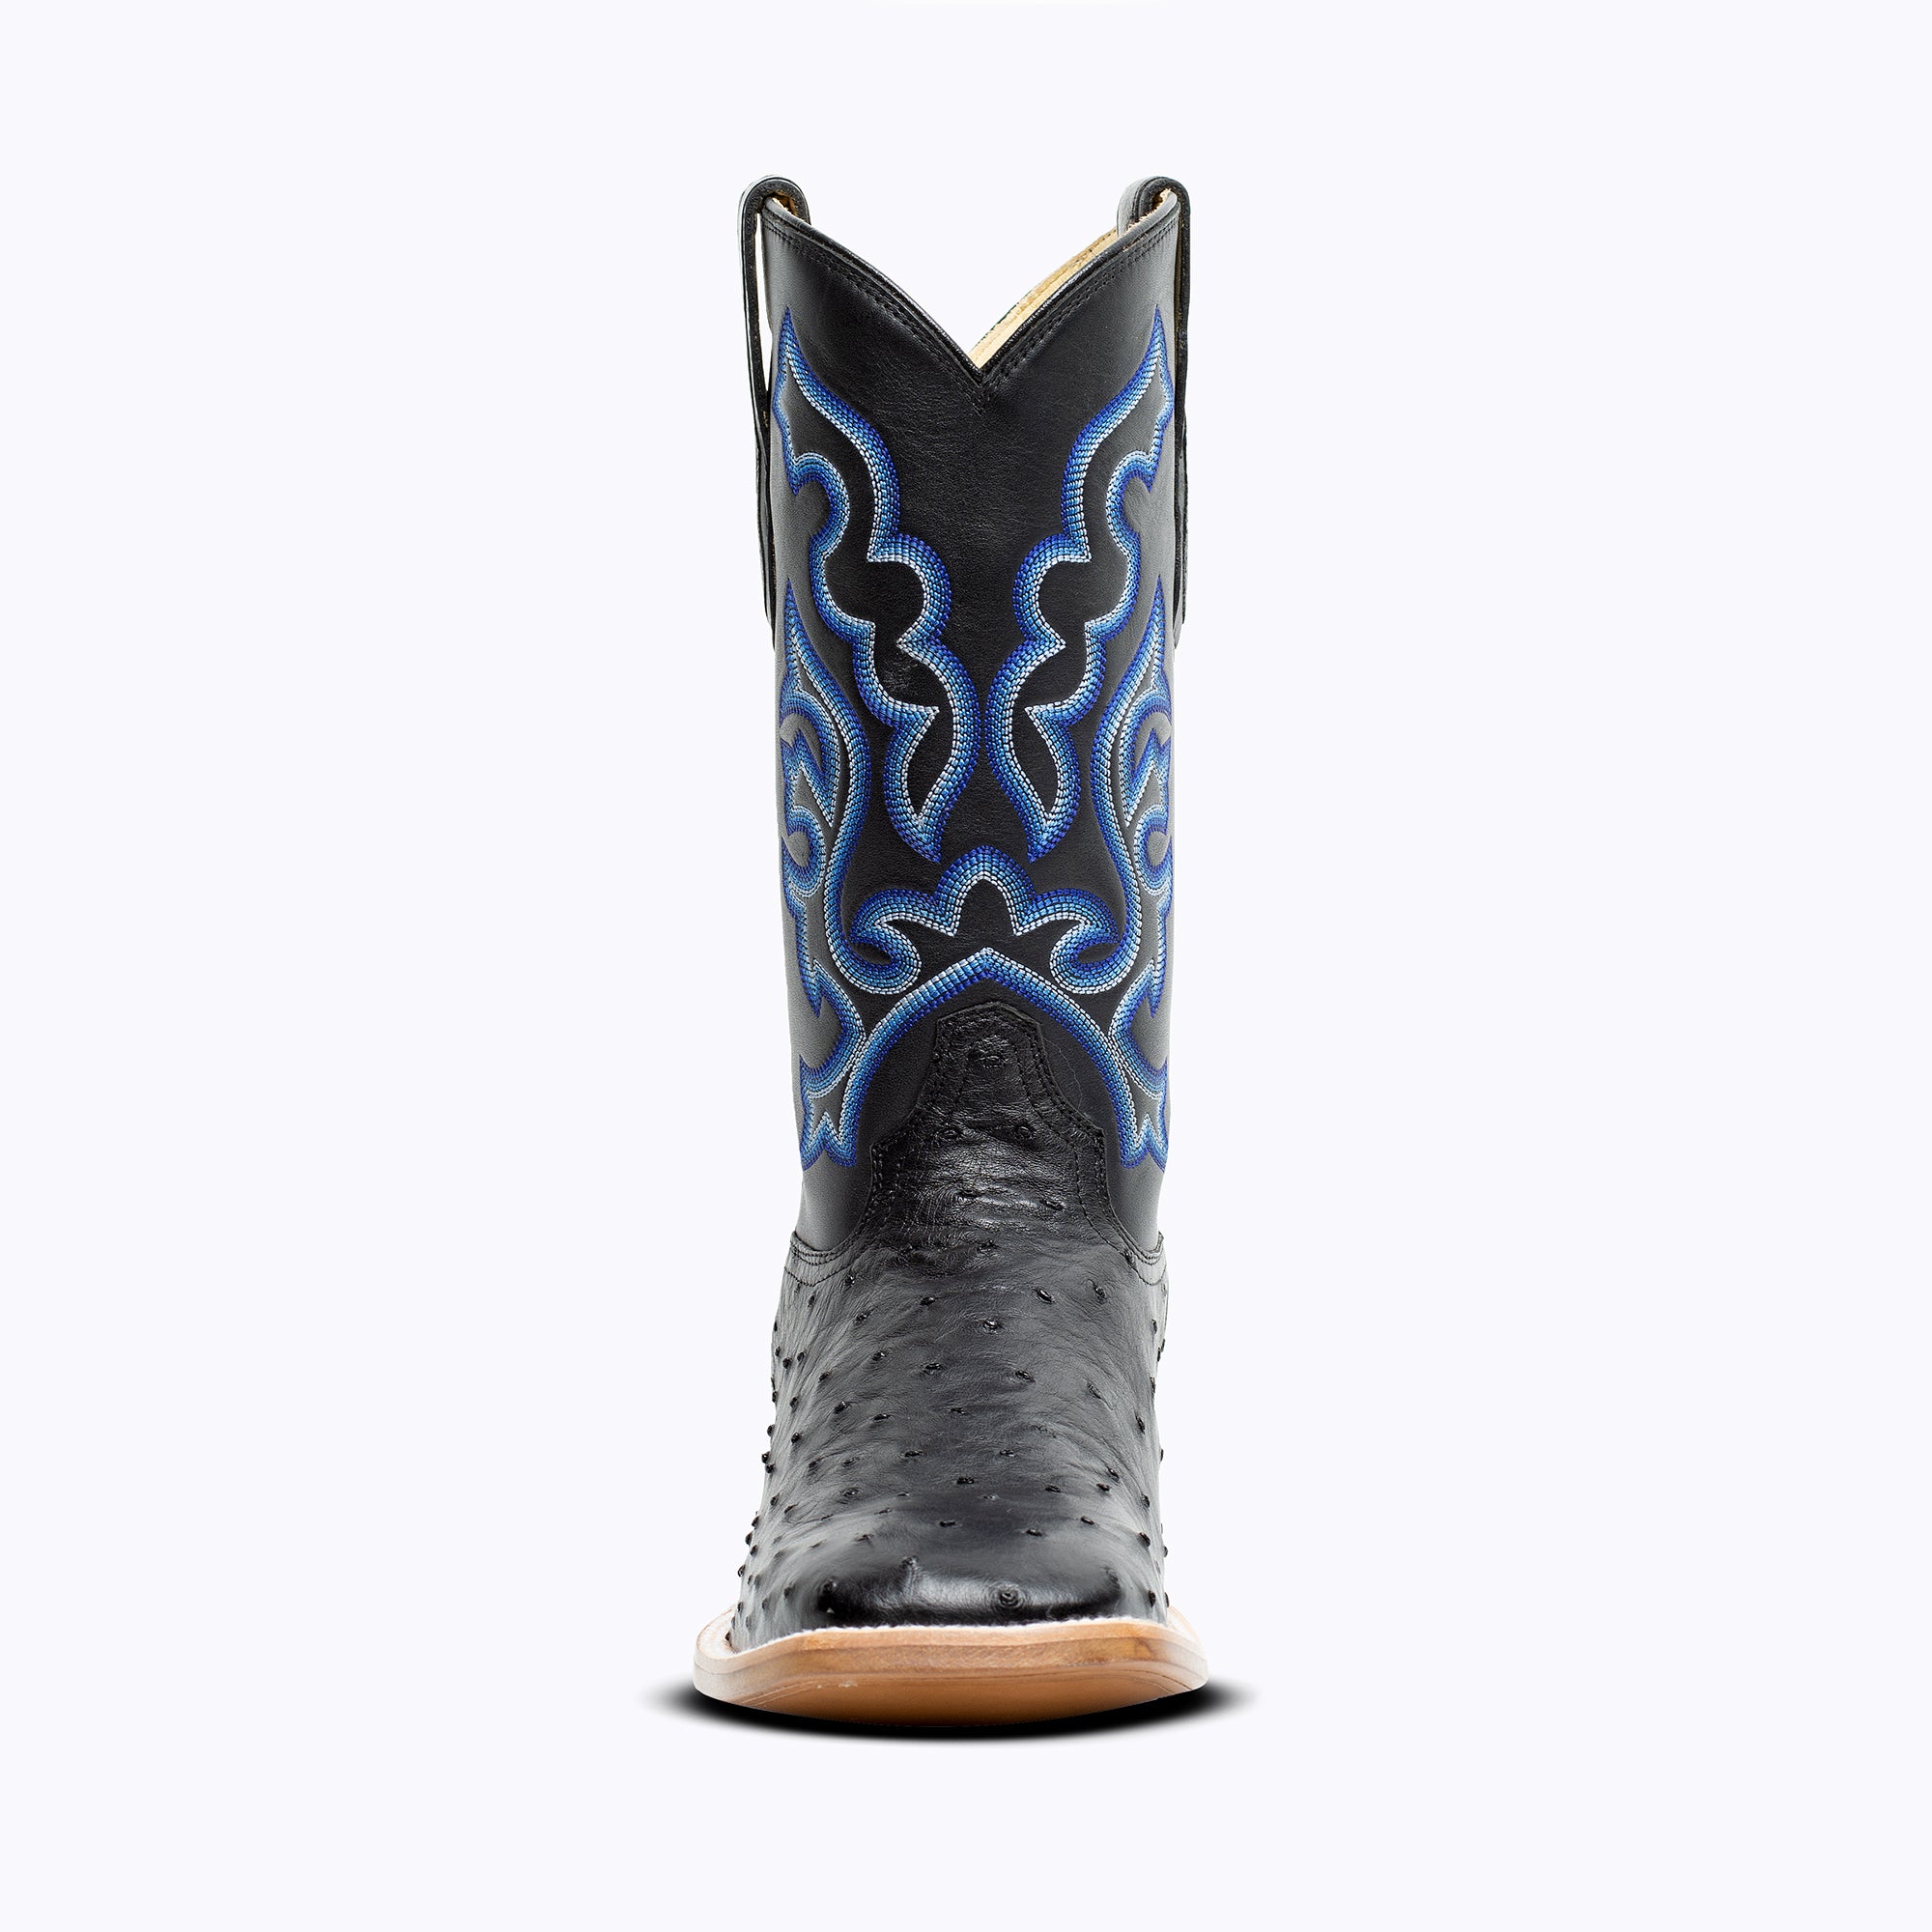 Jackson - Hays edition Full Quill Ostrich Boot - Capitan Boots